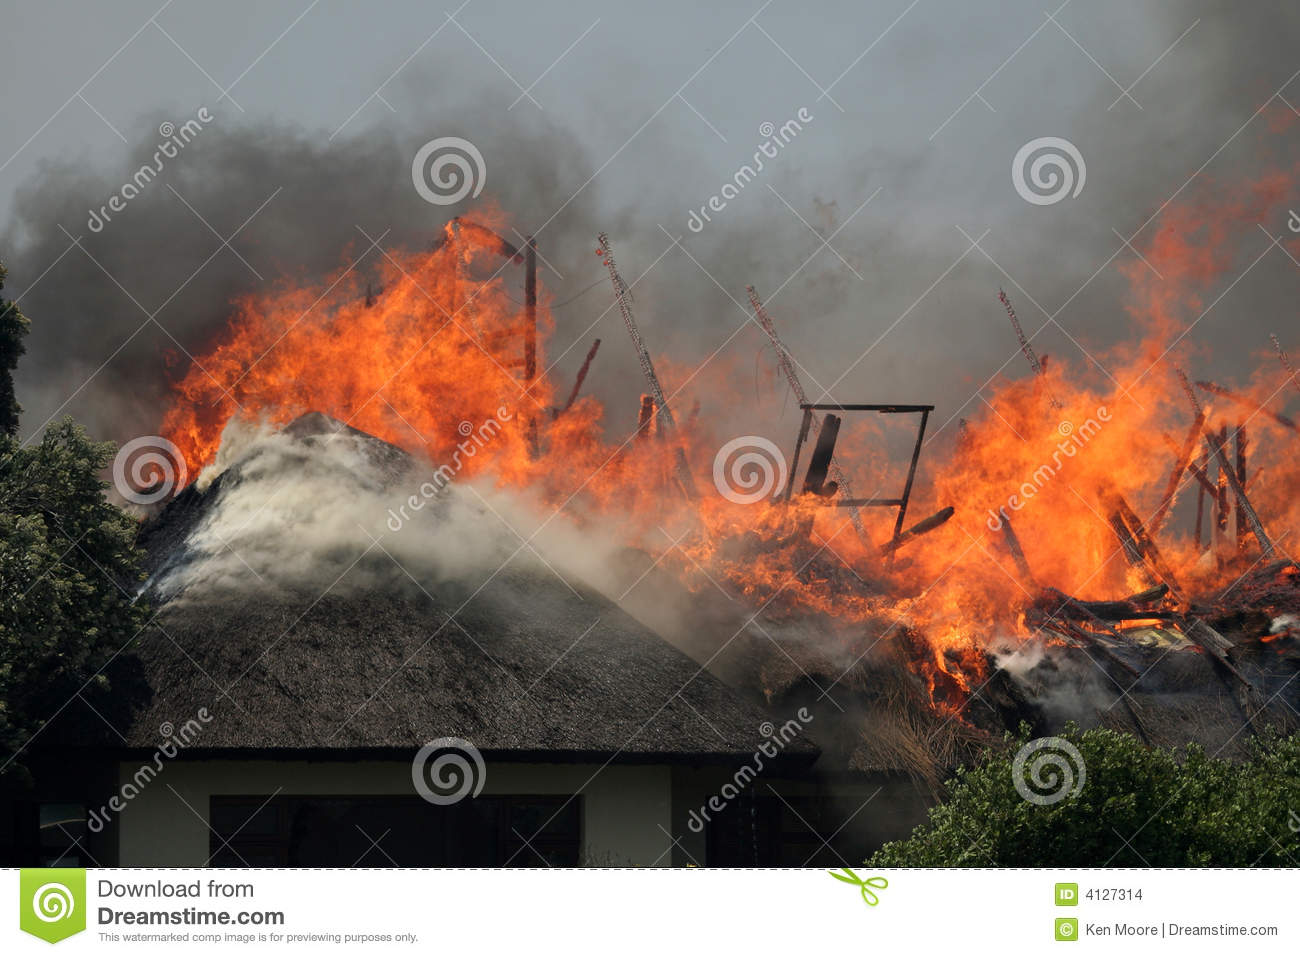 Roof House On Fire Jan 22 2008 Hermanus South Africa Mr No Pr No 2